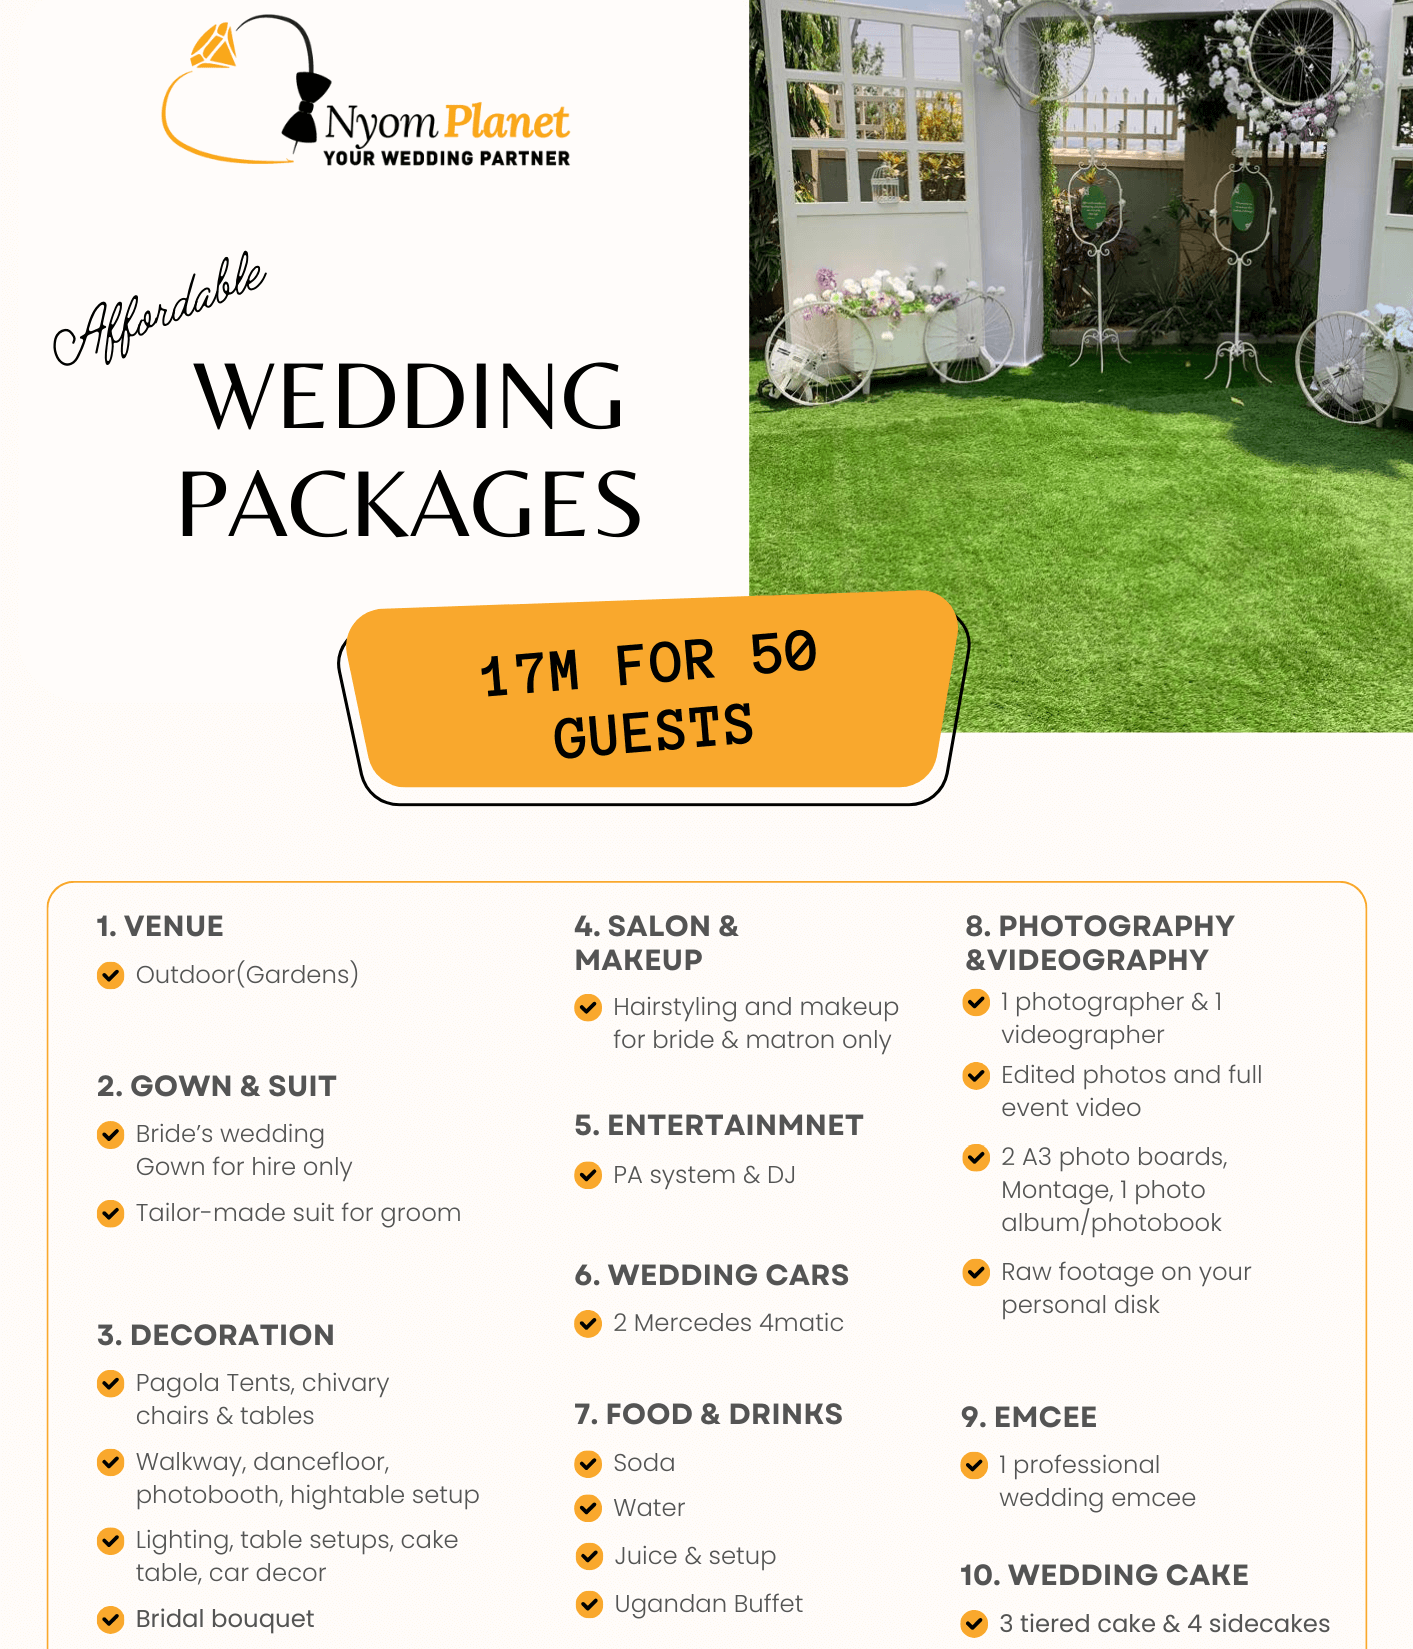 50 Guests wedding package at 17m ugx